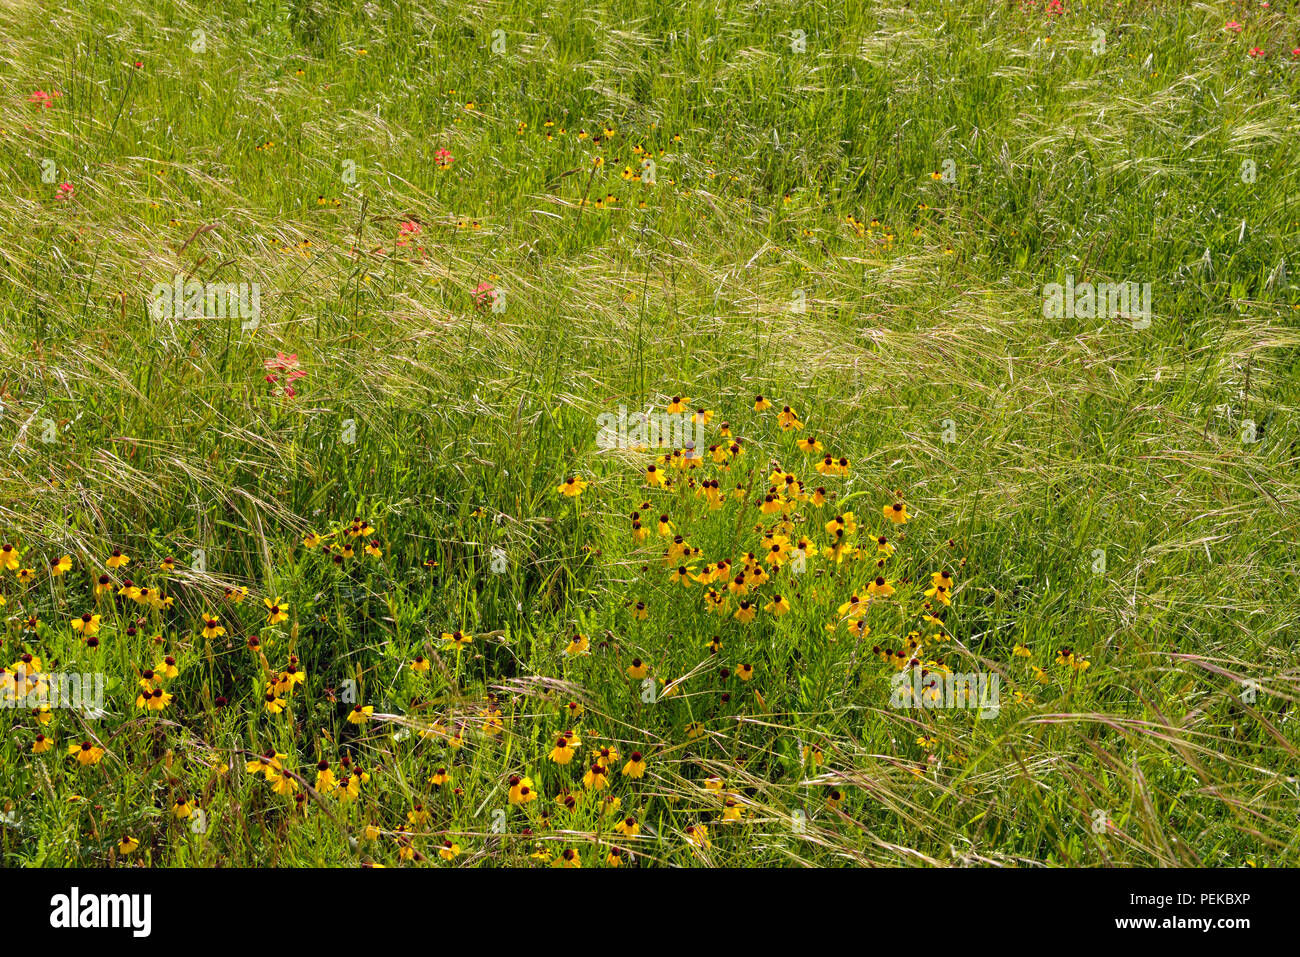 Spring wildflowers- Texas paintbrush and roadside grasses, Burnet County, Texas, USA Stock Photo